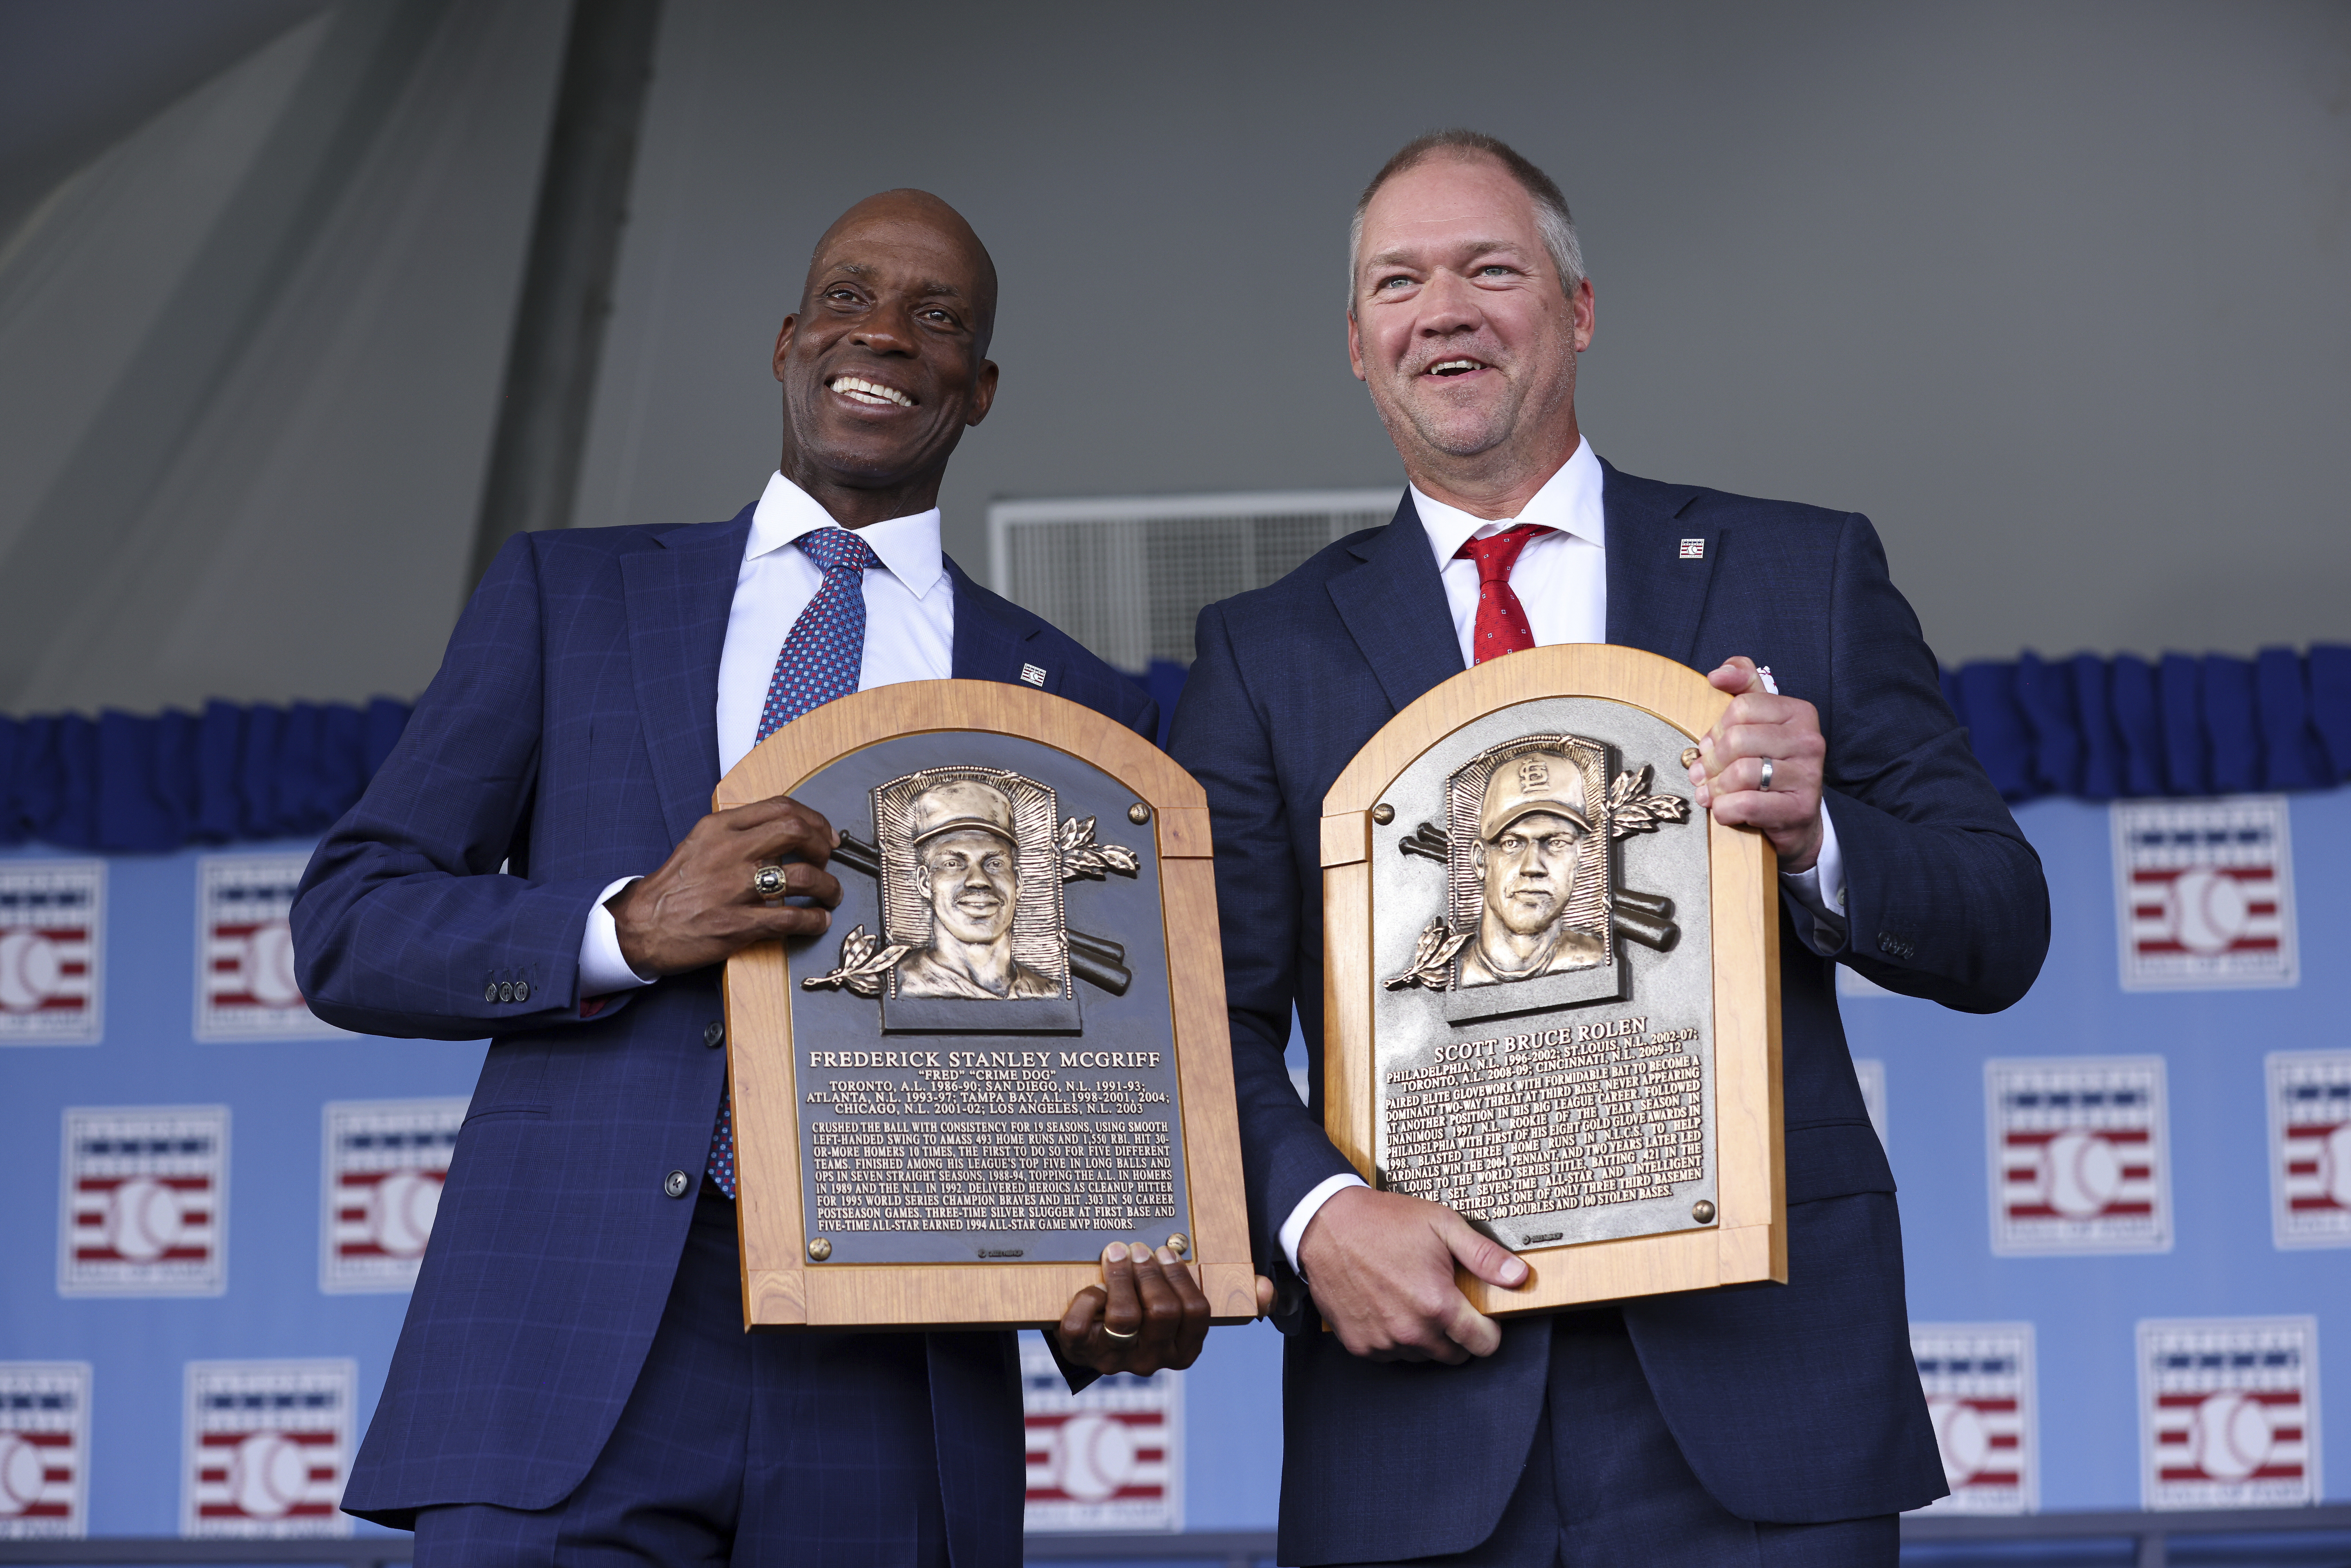 Scott Rolen credits parents, Fred McGriff thanks fellow players at Baseball  Hall of Fame induction 